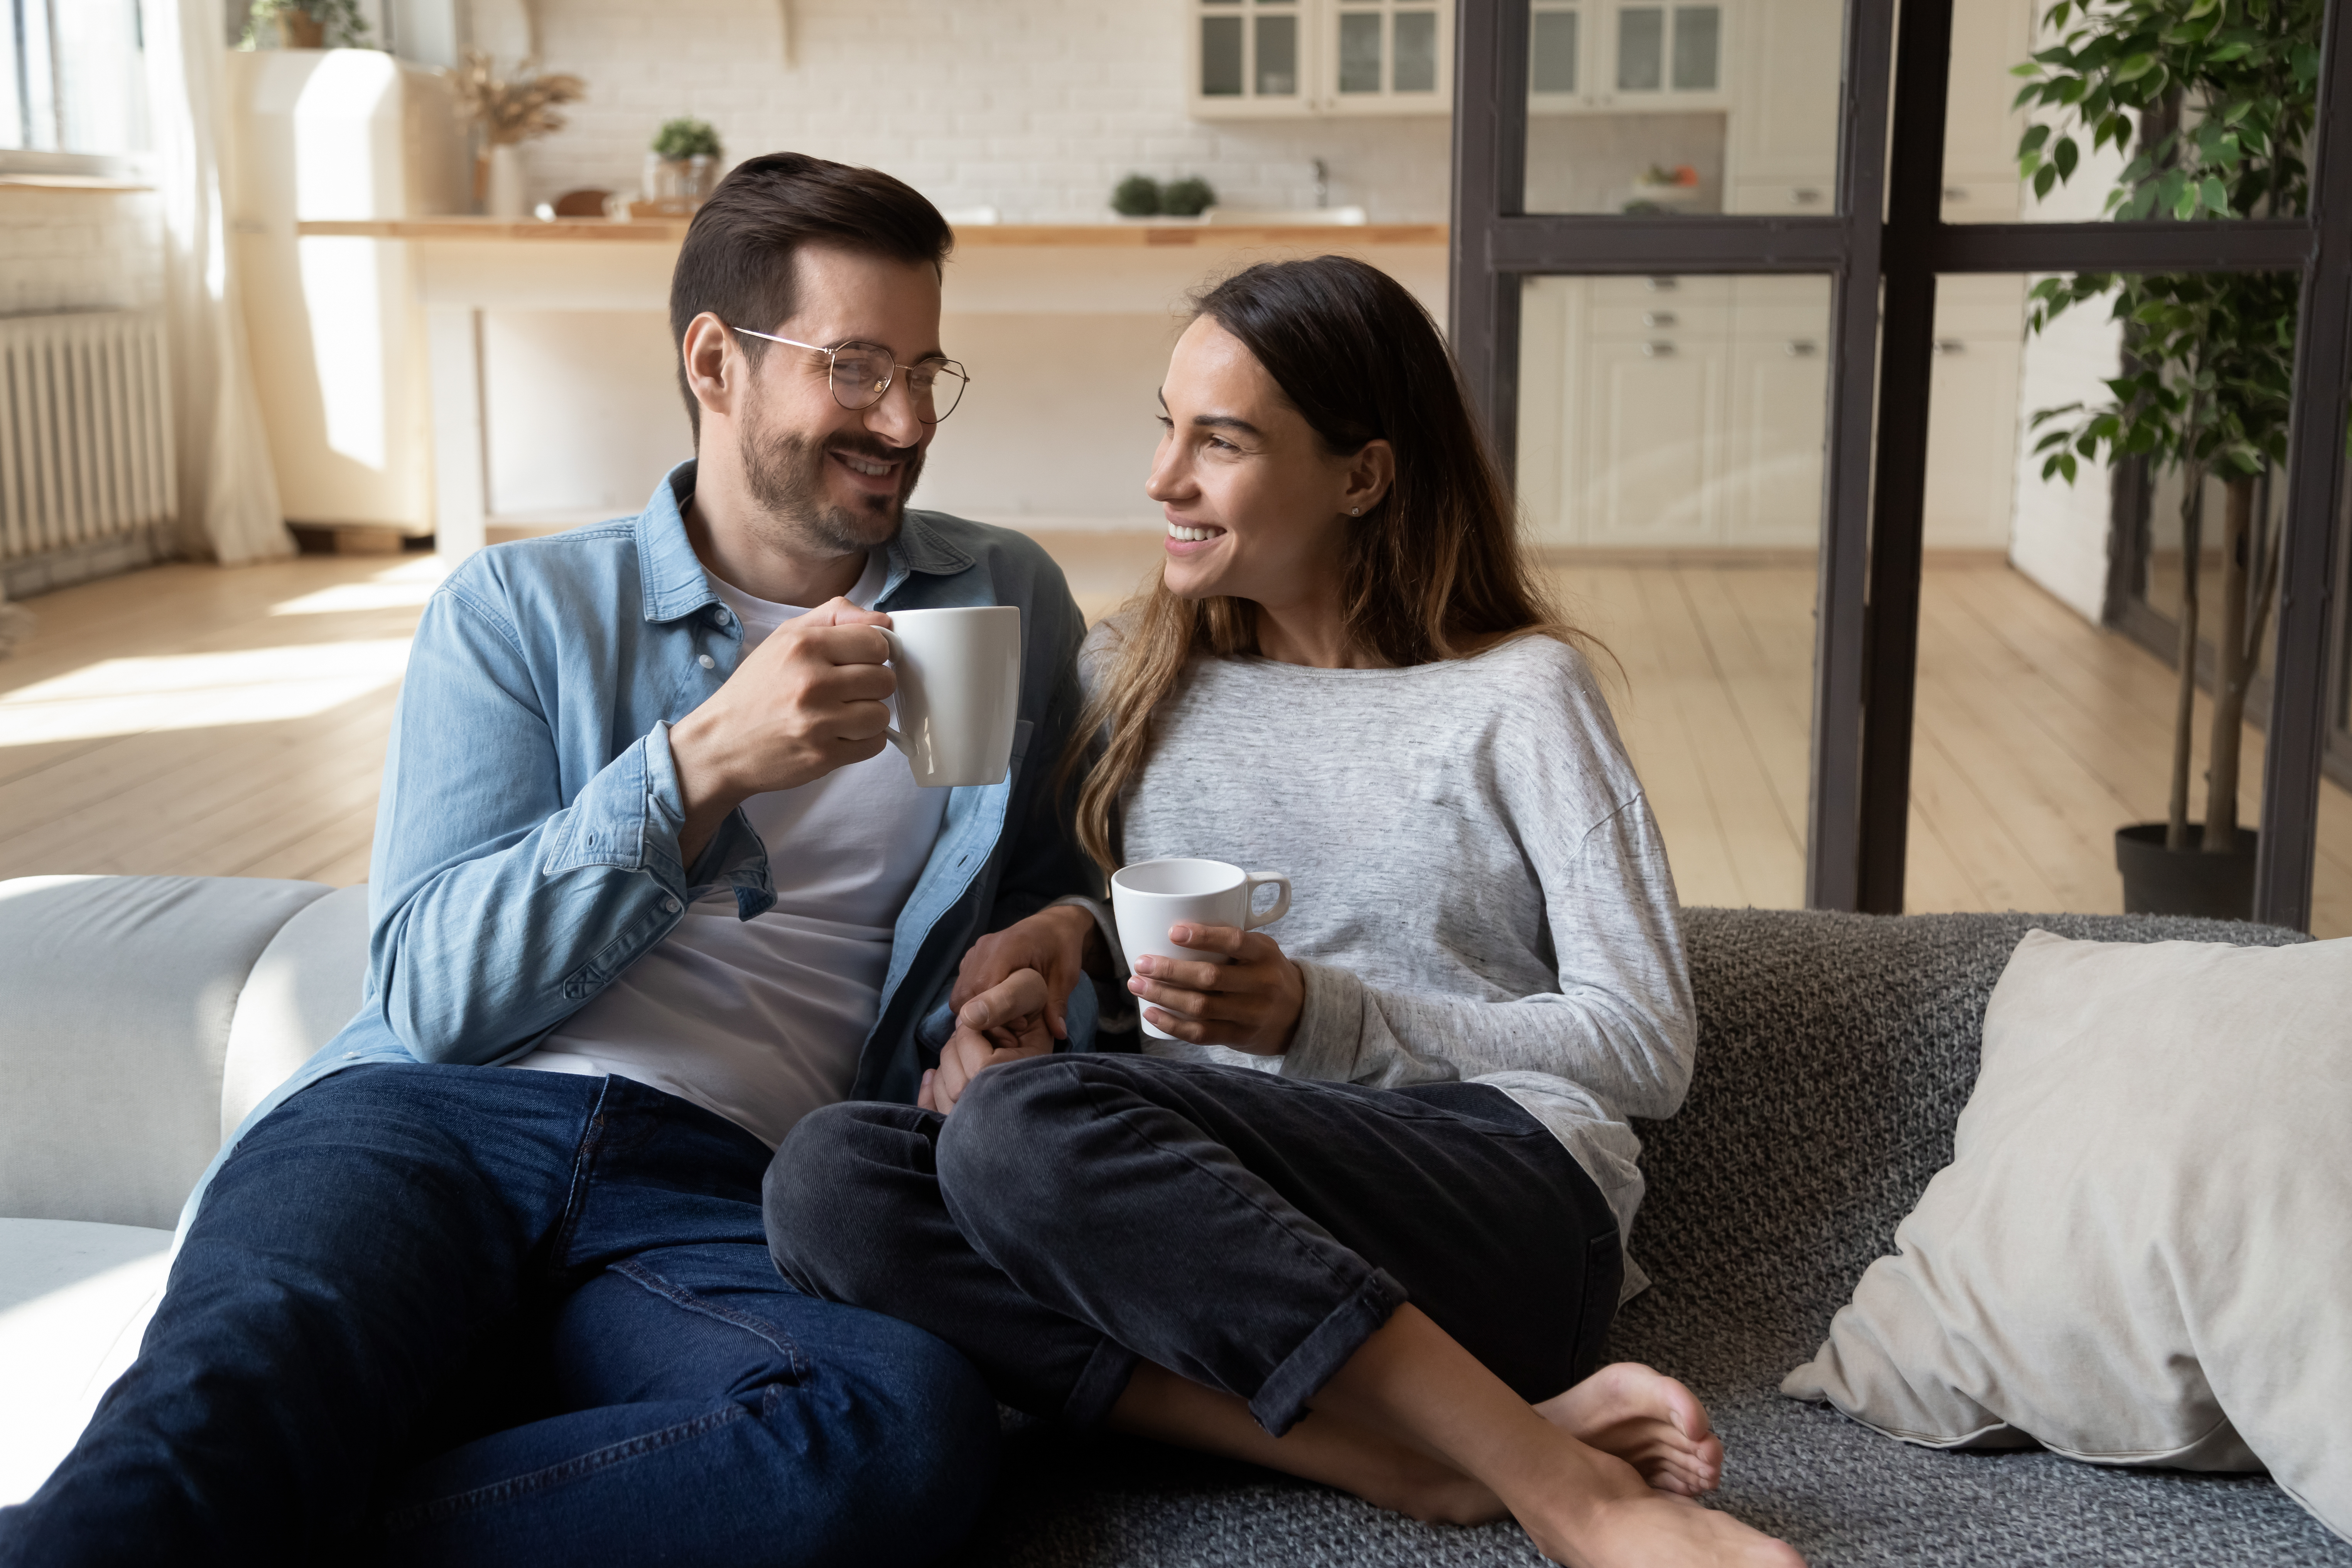 A happy couple relaxing at home | Source: Shutterstock